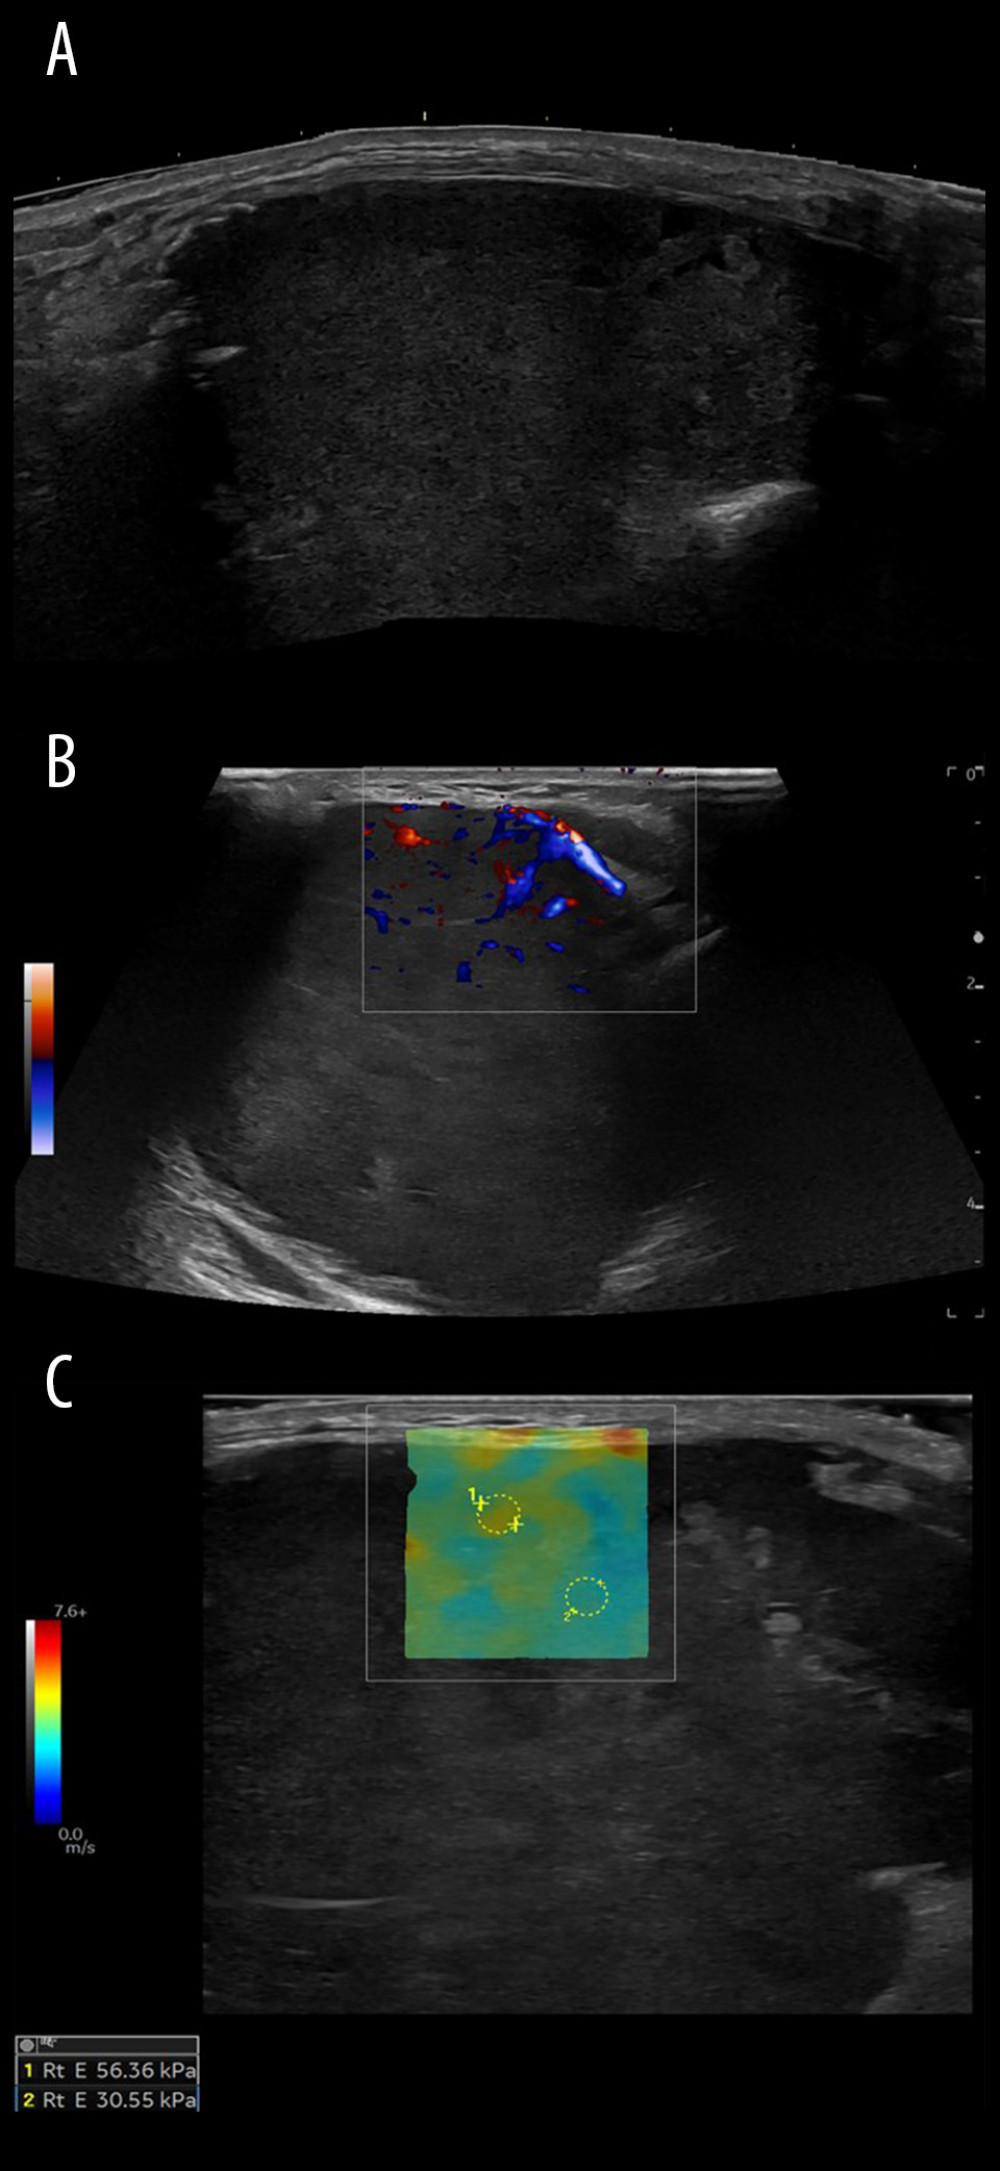 Images obtained during a core biopsy. Extended field-of-view B-mode image (A) shows an irregular hypoechoic mass in the distal ulna. Color Doppler flow imaging (B) demonstrates hypervascular tumor stroma with numerous sinusoidal vessels typical for giant cell tumor of bone. On shear-wave elastography (C), the color elastogram shows predominantly blue/cyan and cyan/green readings performed on 2 small areas of the superficial aspect of the tumor stroma (areas of low to intermediate stiffness, measuring 30–60 kPa).